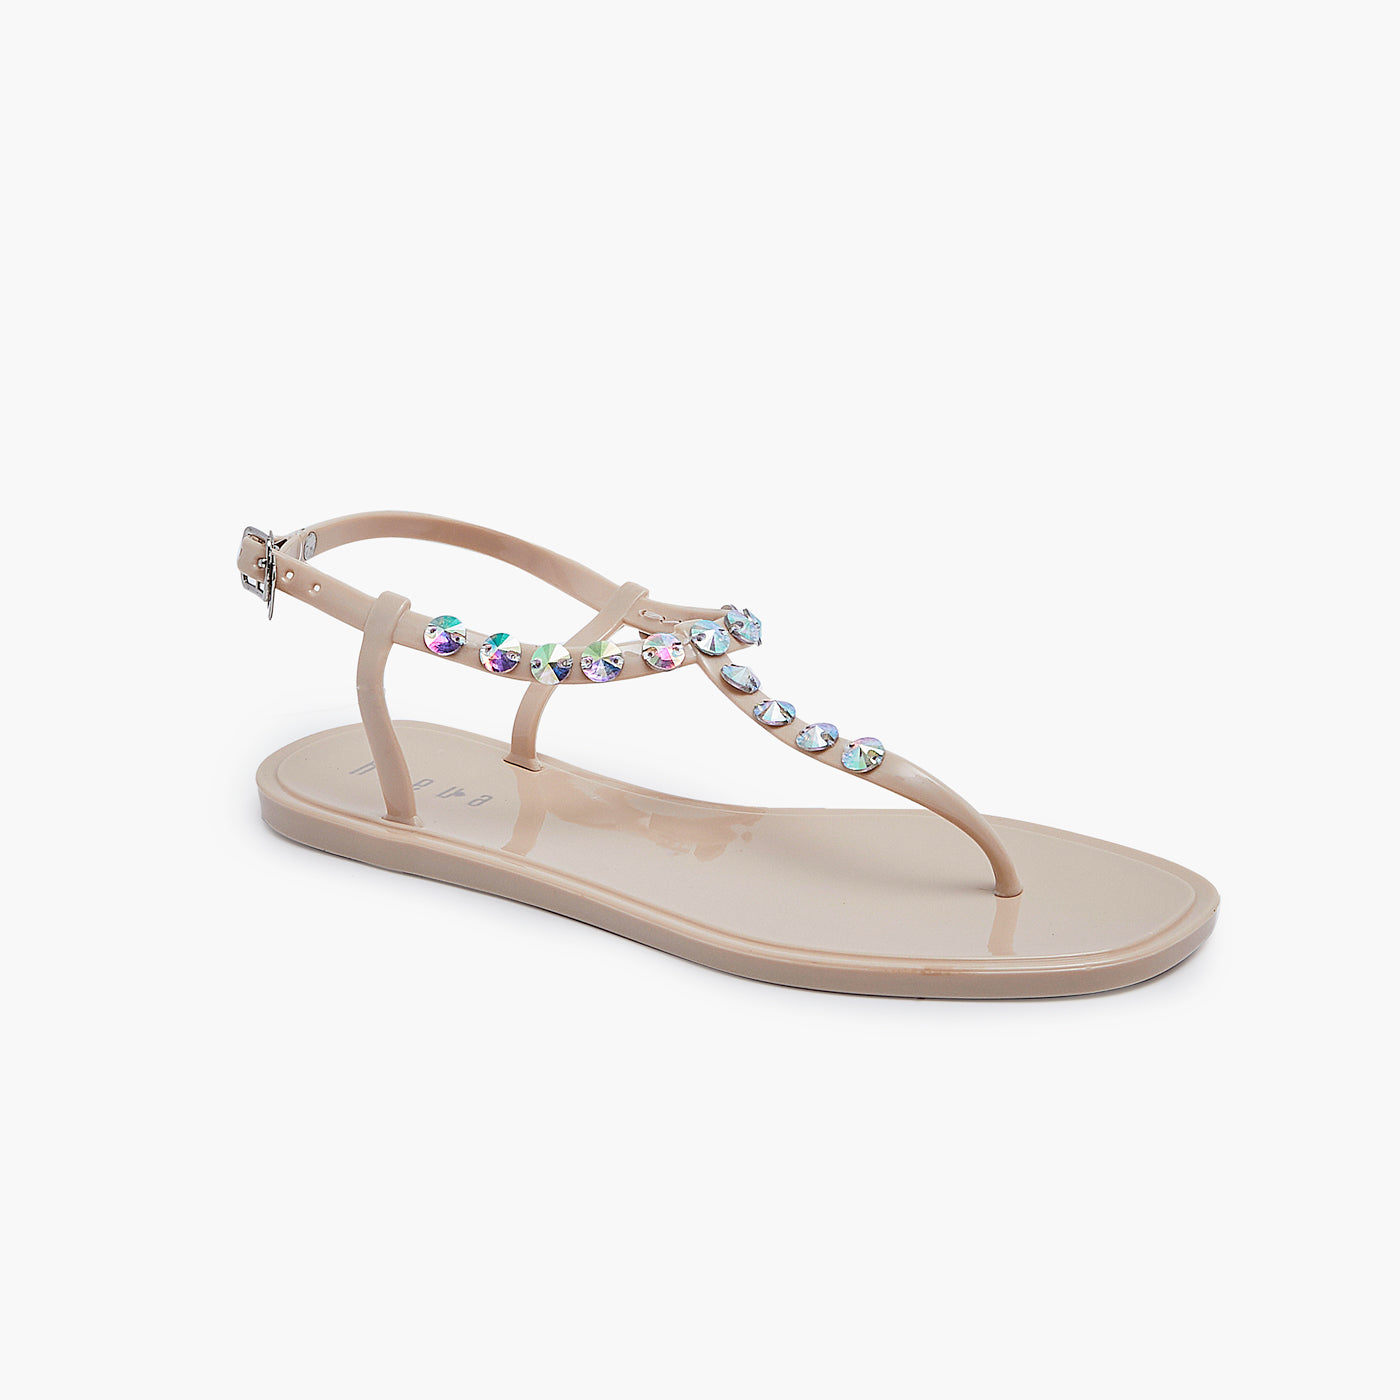 Hush Puppies Dainty Embellished Sandals